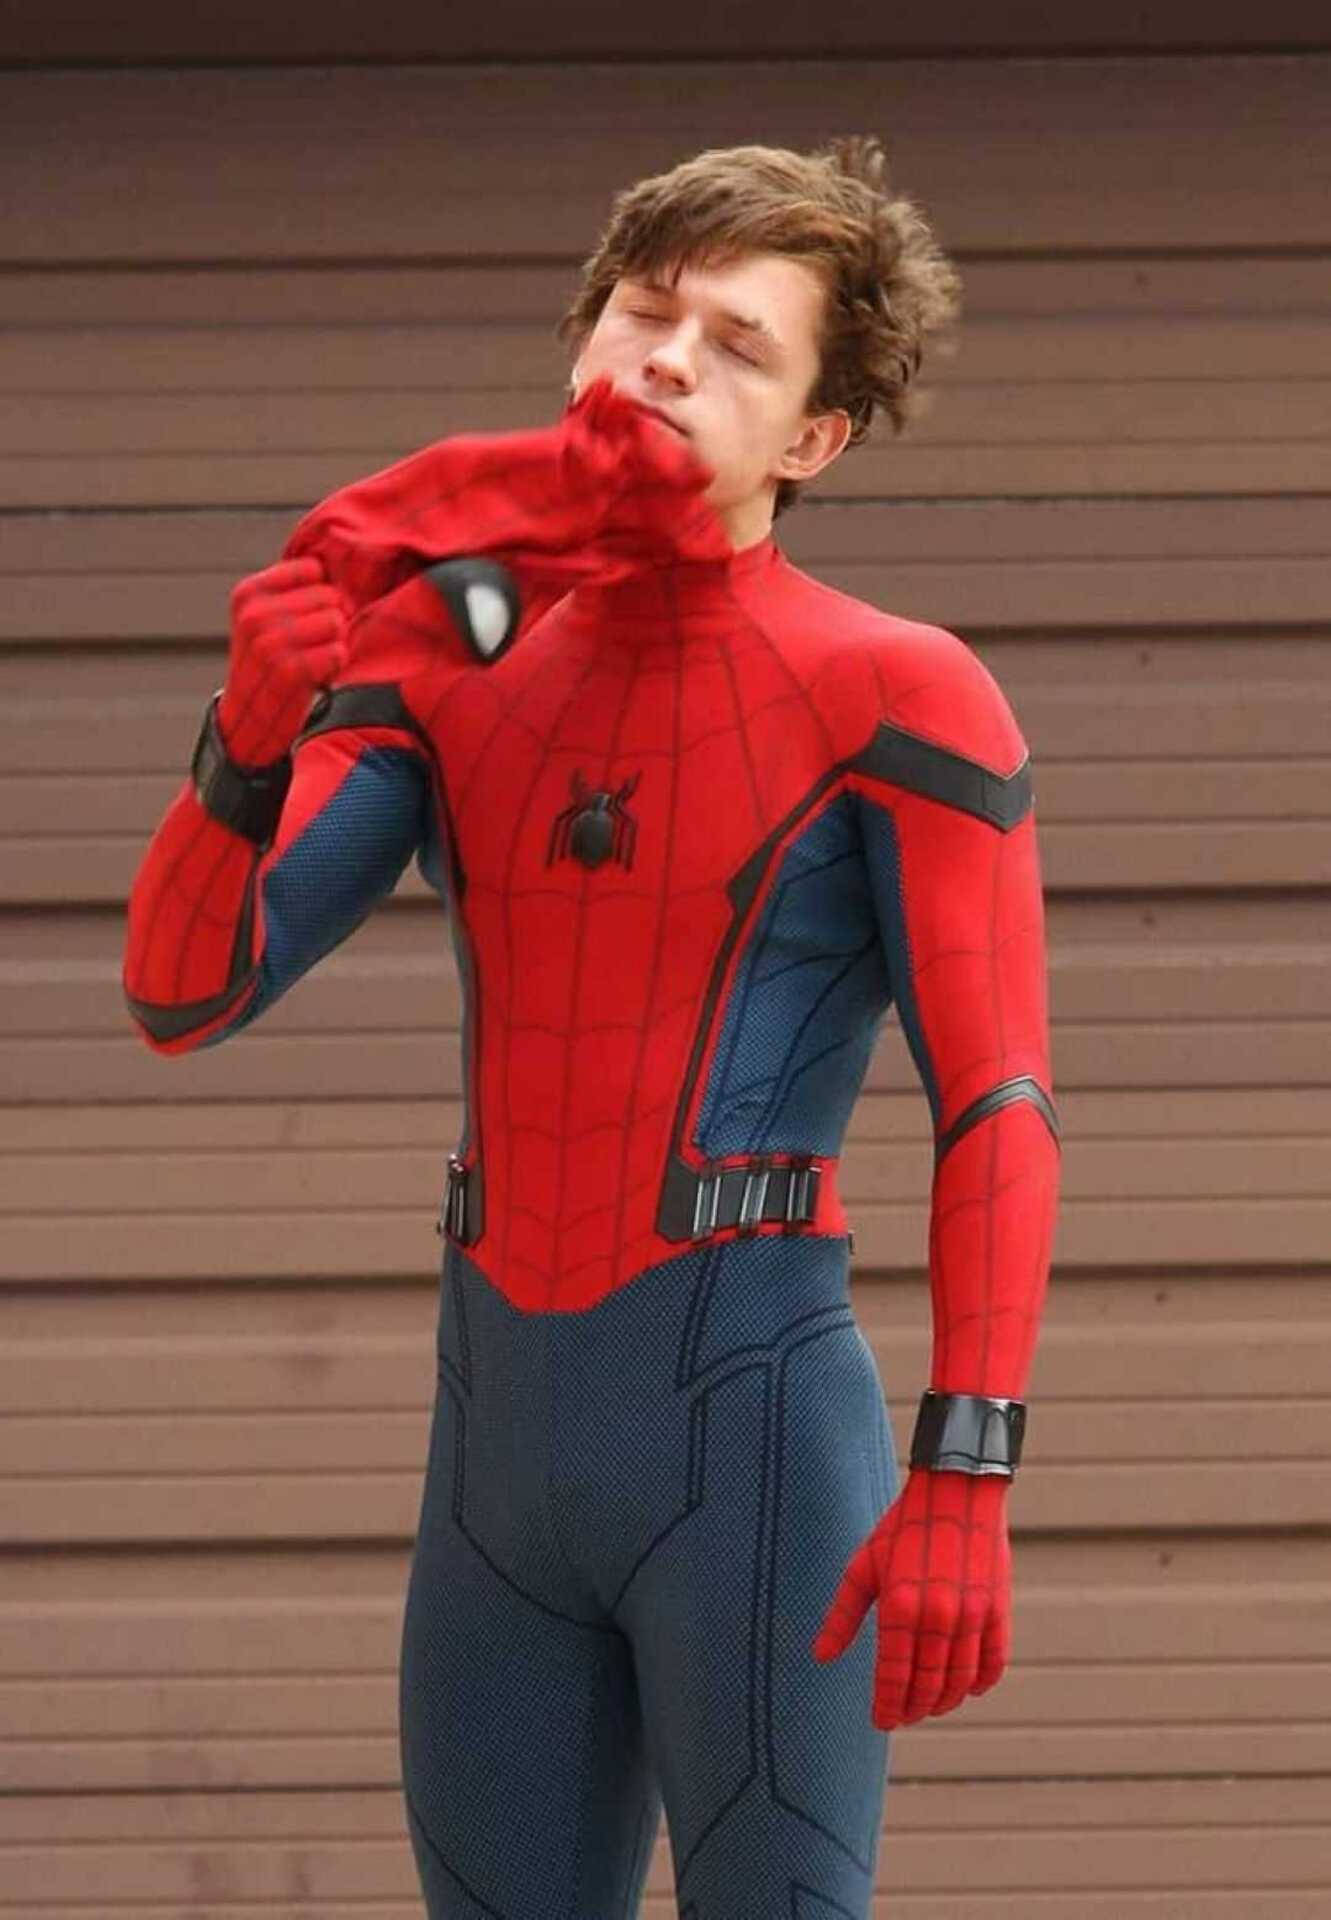 Tom Holland In Character At A Movie Set Background